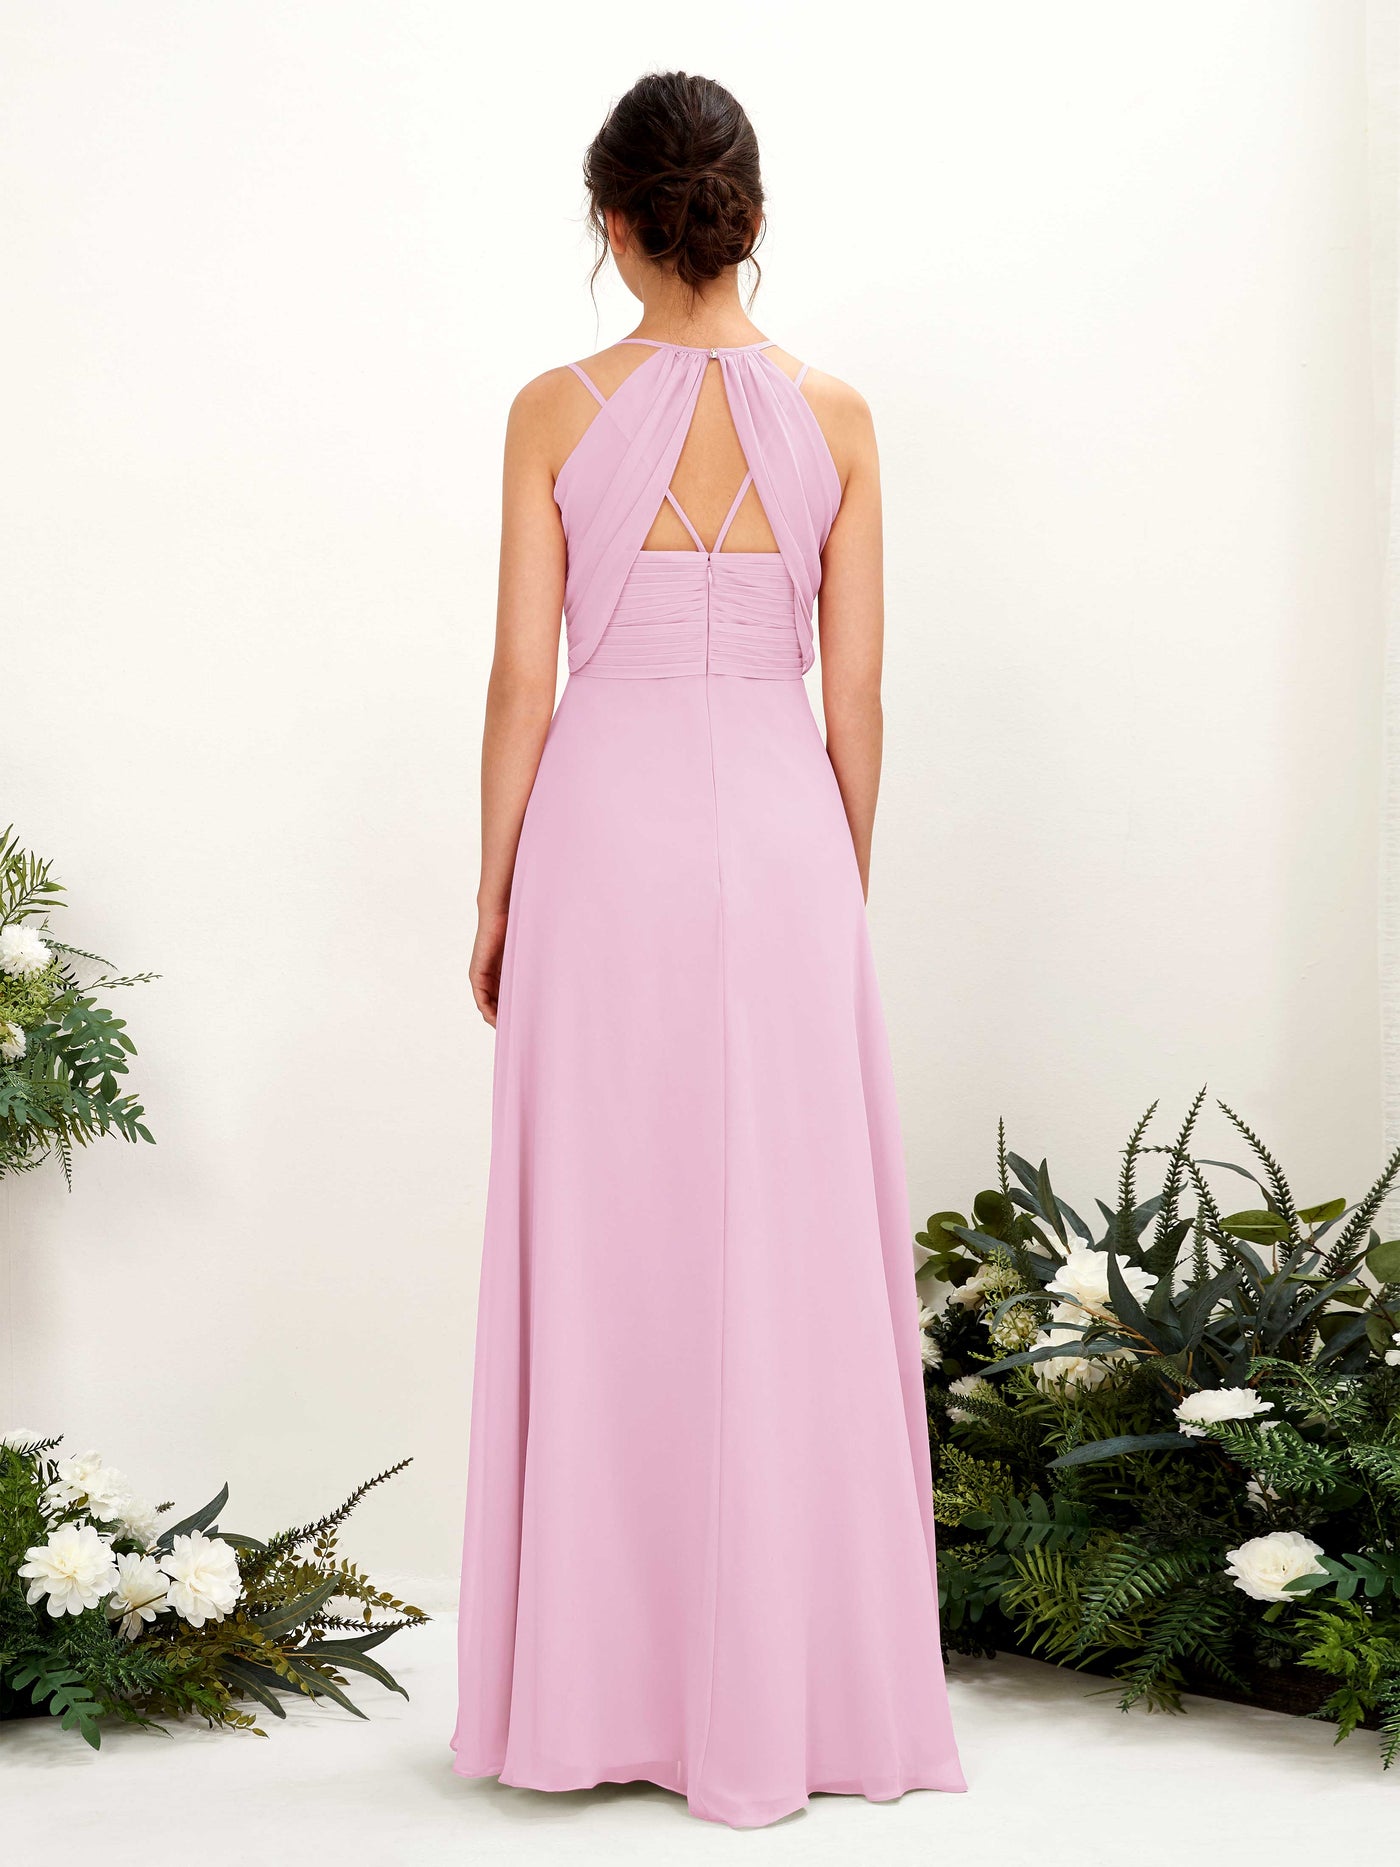 Candy Pink Bridesmaid Dresses Bridesmaid Dress A-line Chiffon Spaghetti-straps Full Length Sleeveless Wedding Party Dress (81225439)#color_candy-pink